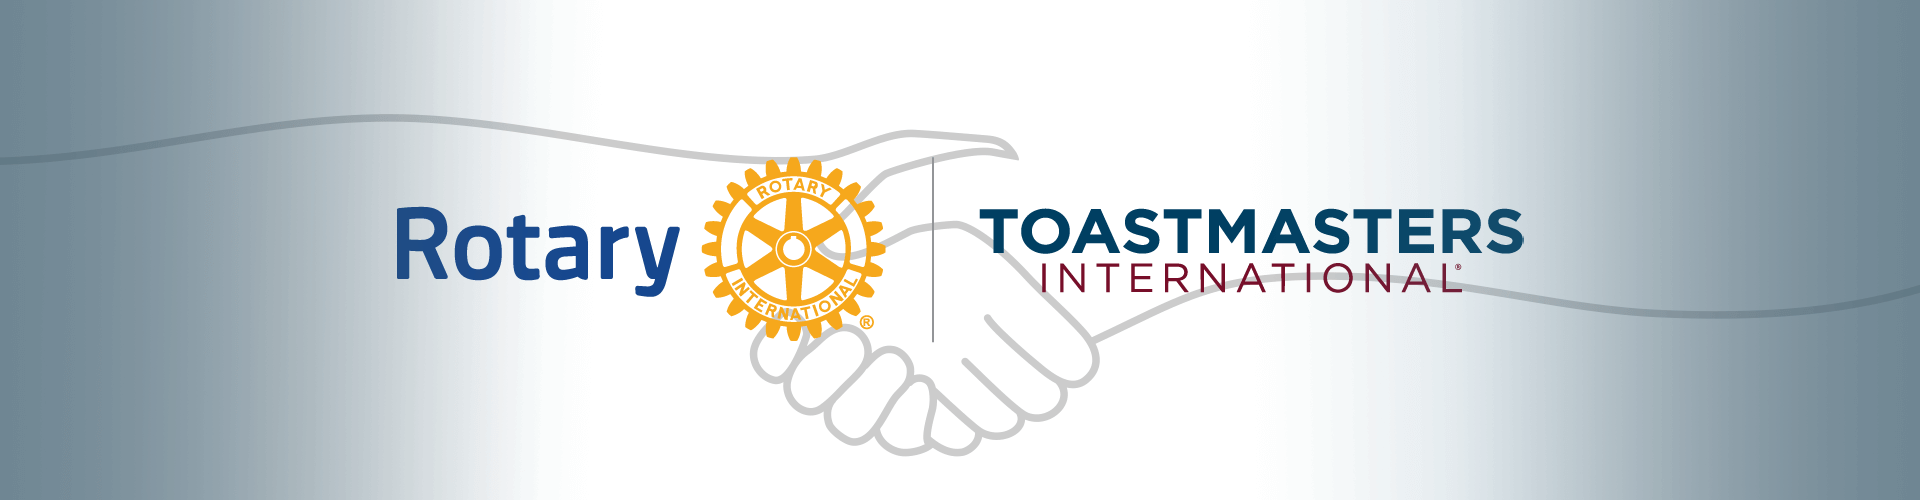 Two hands shaking with Rotary and Toastmasters logos on gradient background